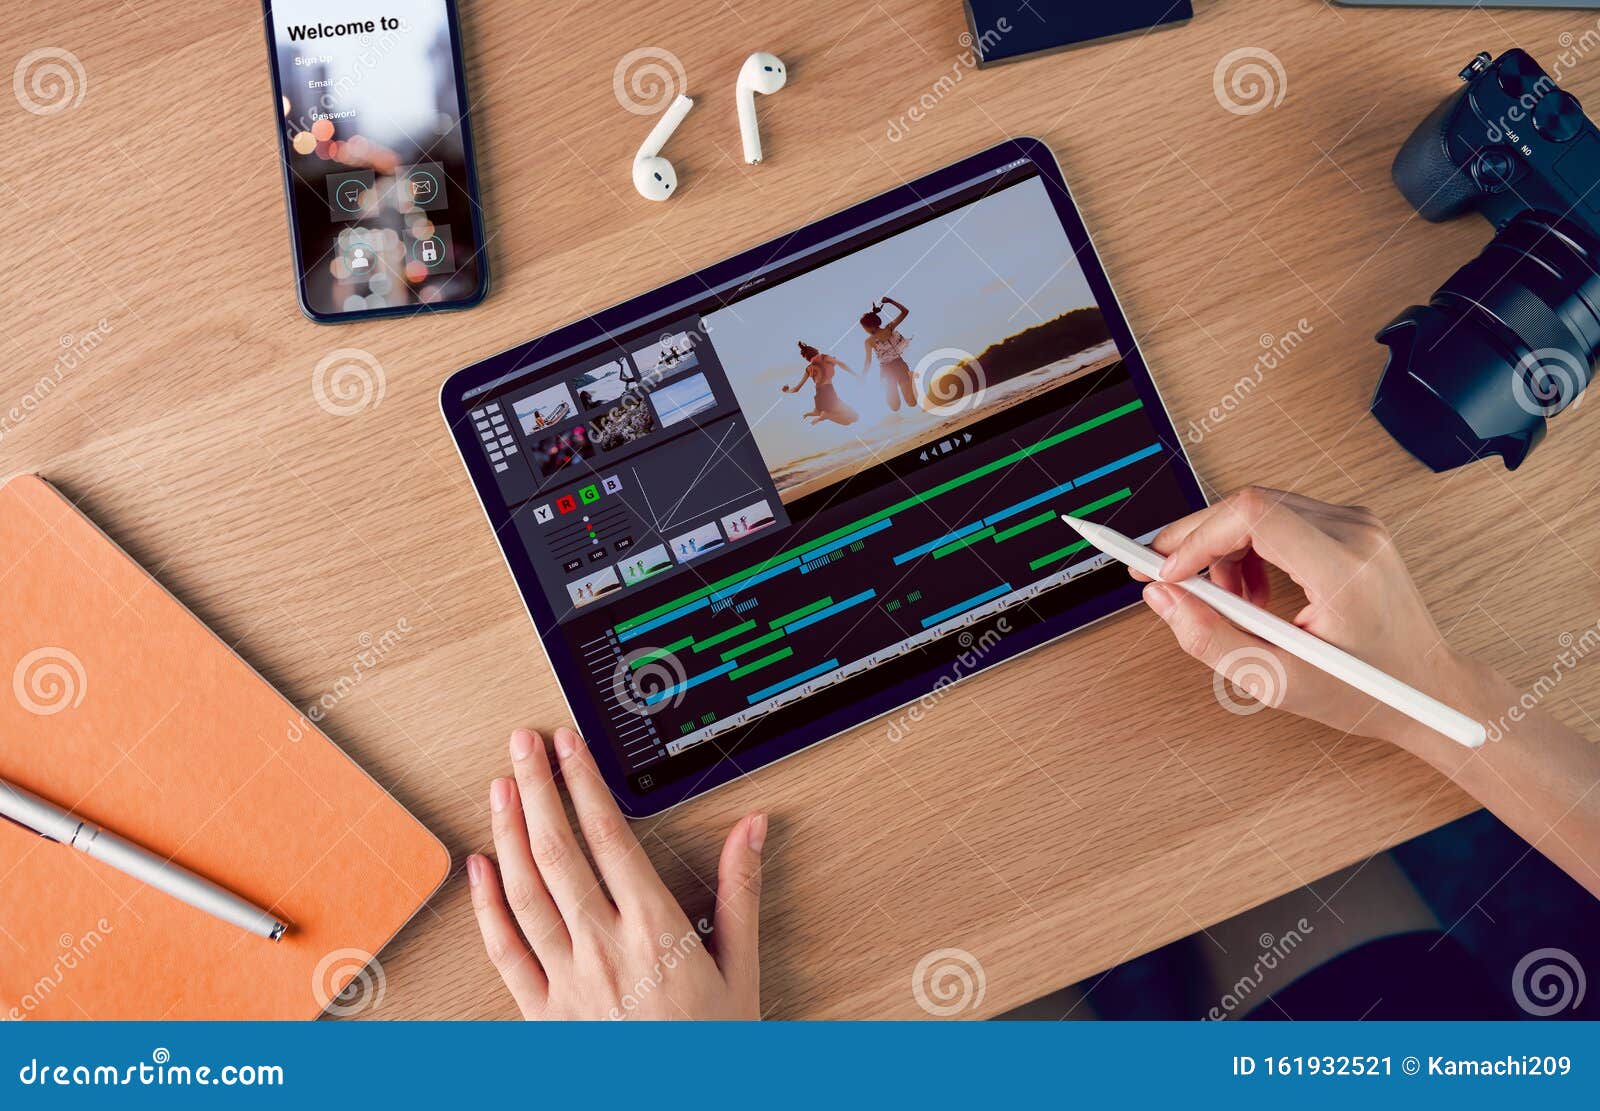 concept of simple operation of blogger and vlogger, hand using digital pen on video editor works with footage on tablet.